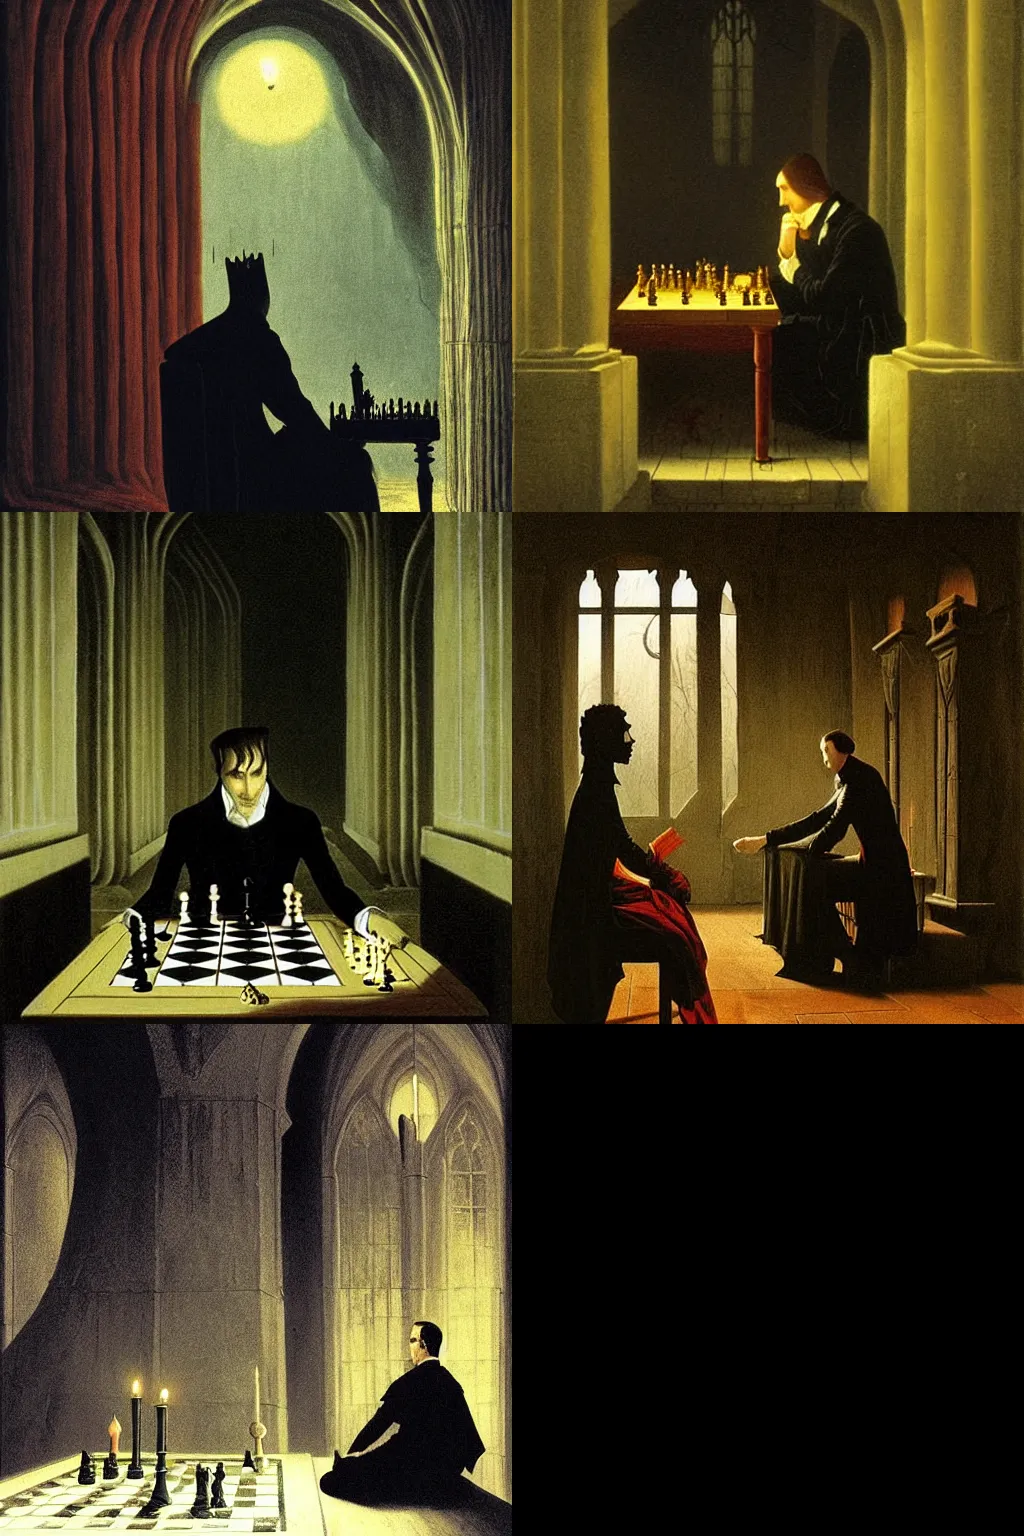 Prompt: count Dracula plays chess alone, melancolicly in a dark, gothic castle at candle light, painting by Caspar David Friedrich